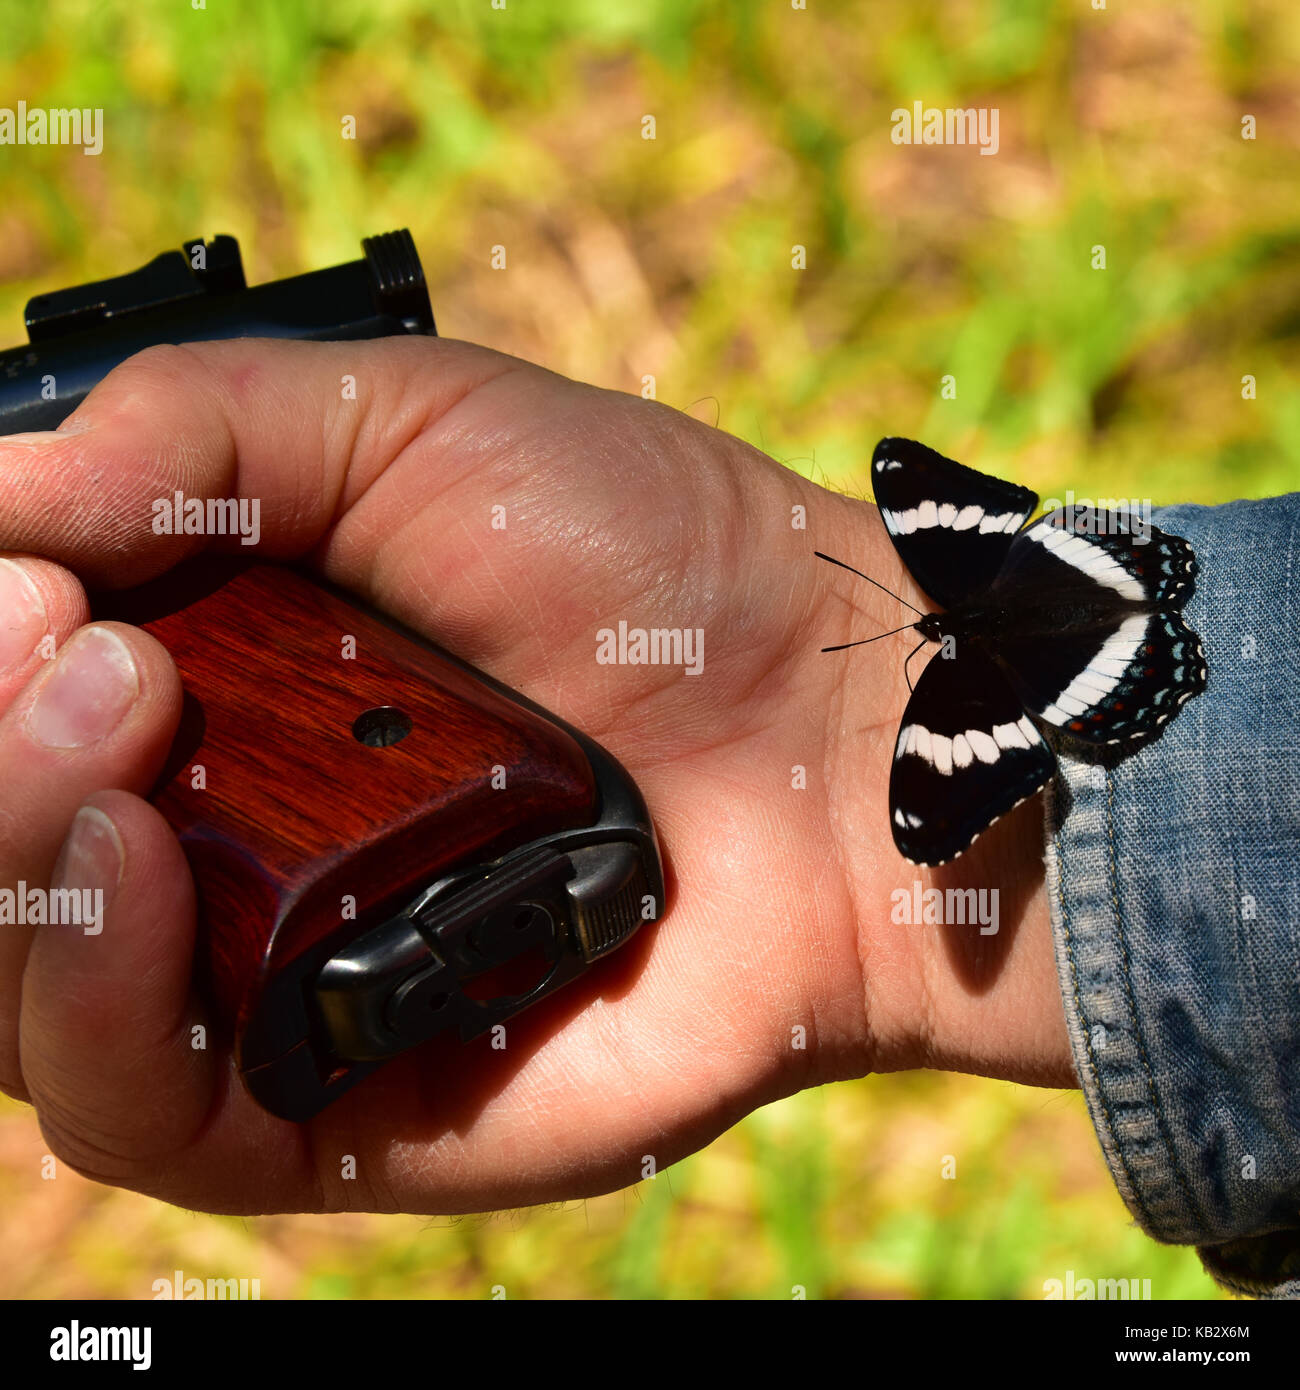 Hand holding pistol with black admiral butterfly on wrist concept love peace war danger conflict. Stock Photo